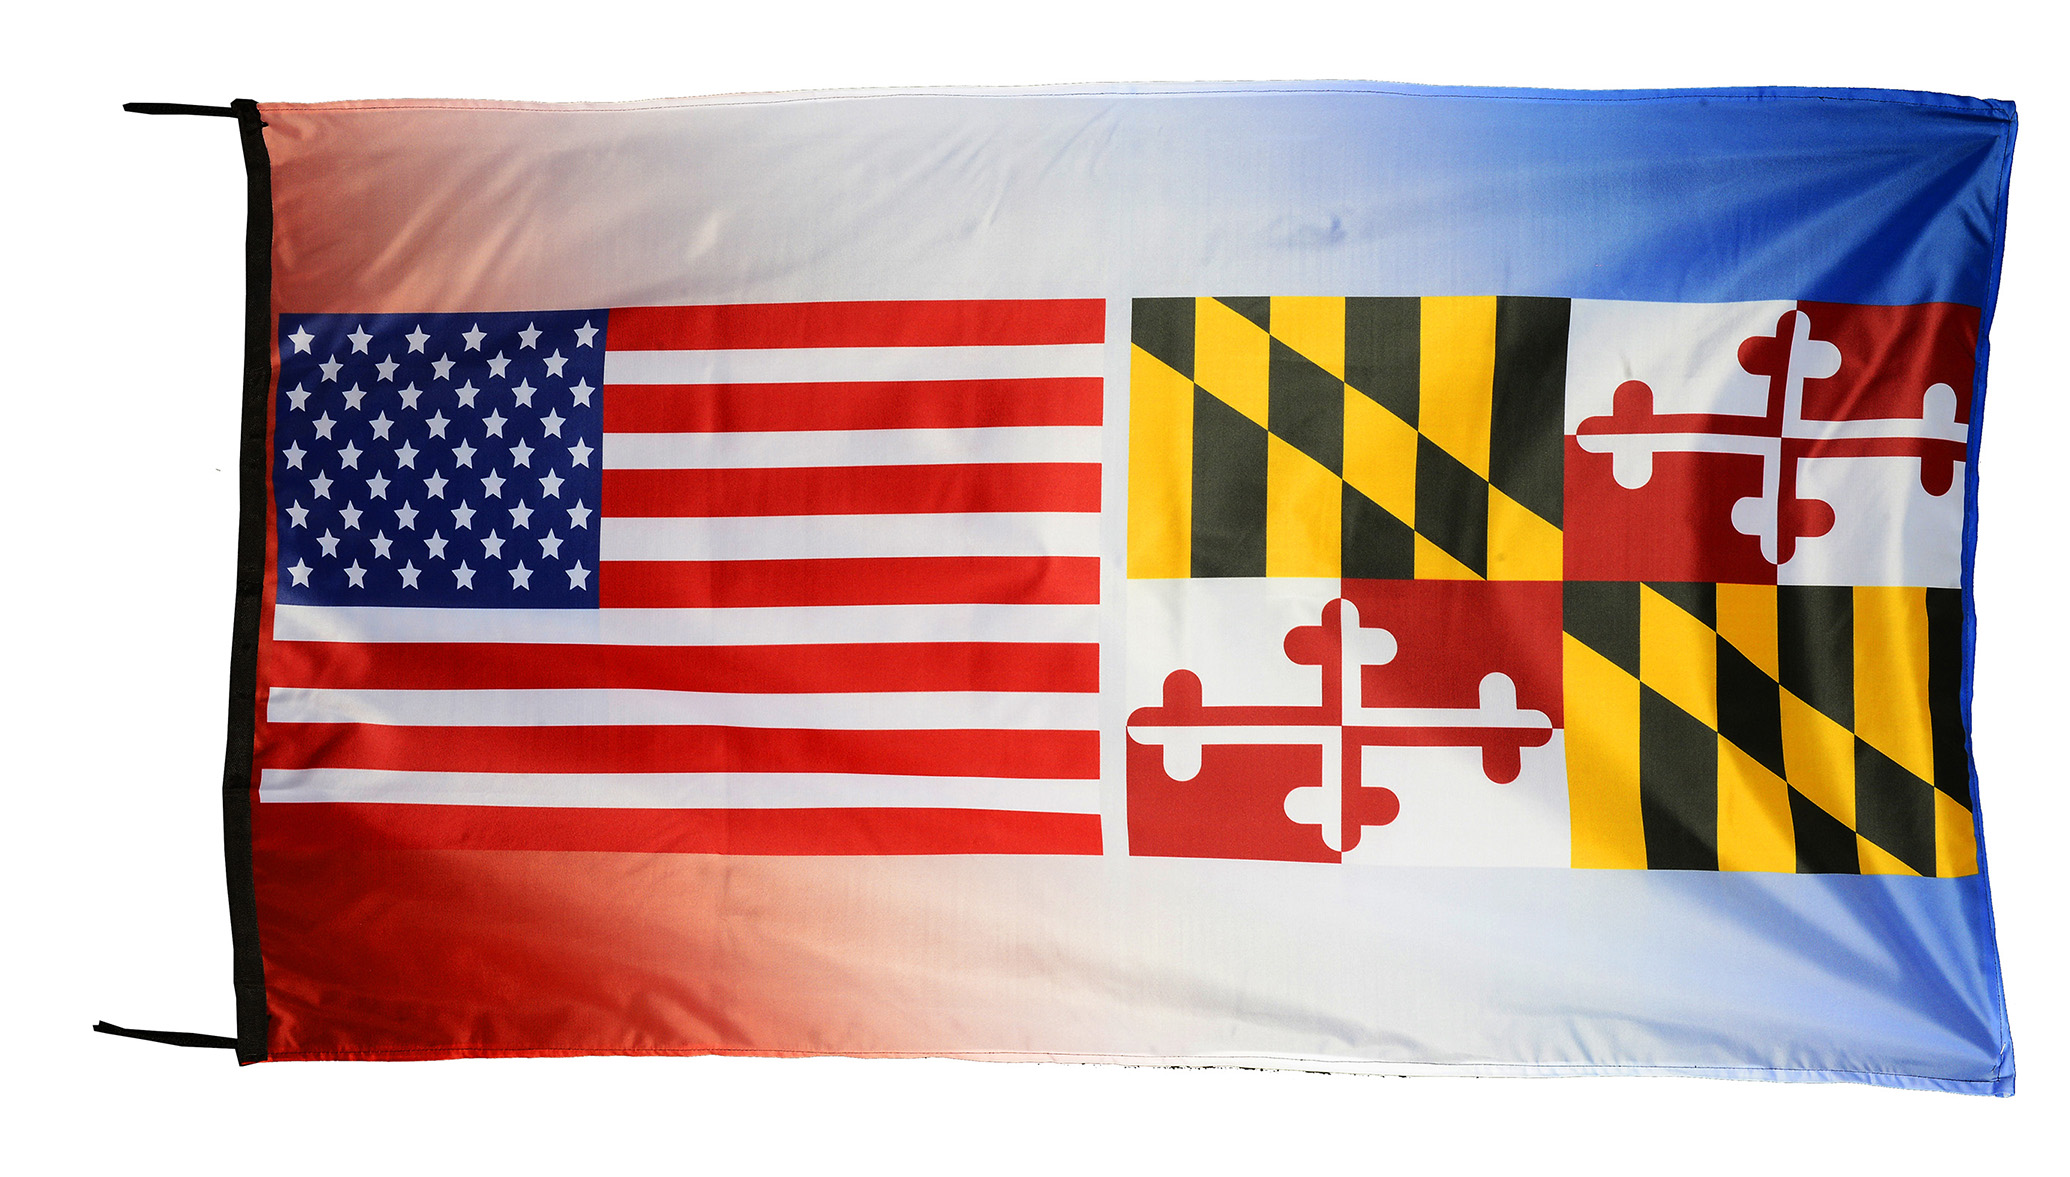 Flag  099 USA / US Country / United States Of America and Kentucky State / Patriotic / Pride Hybrid Weather-Resistant Polyester Outdoor Flag Landscape Banner / Vivid Colors / 3 X 5 FT (150 x 90cm) International Flags for Sale